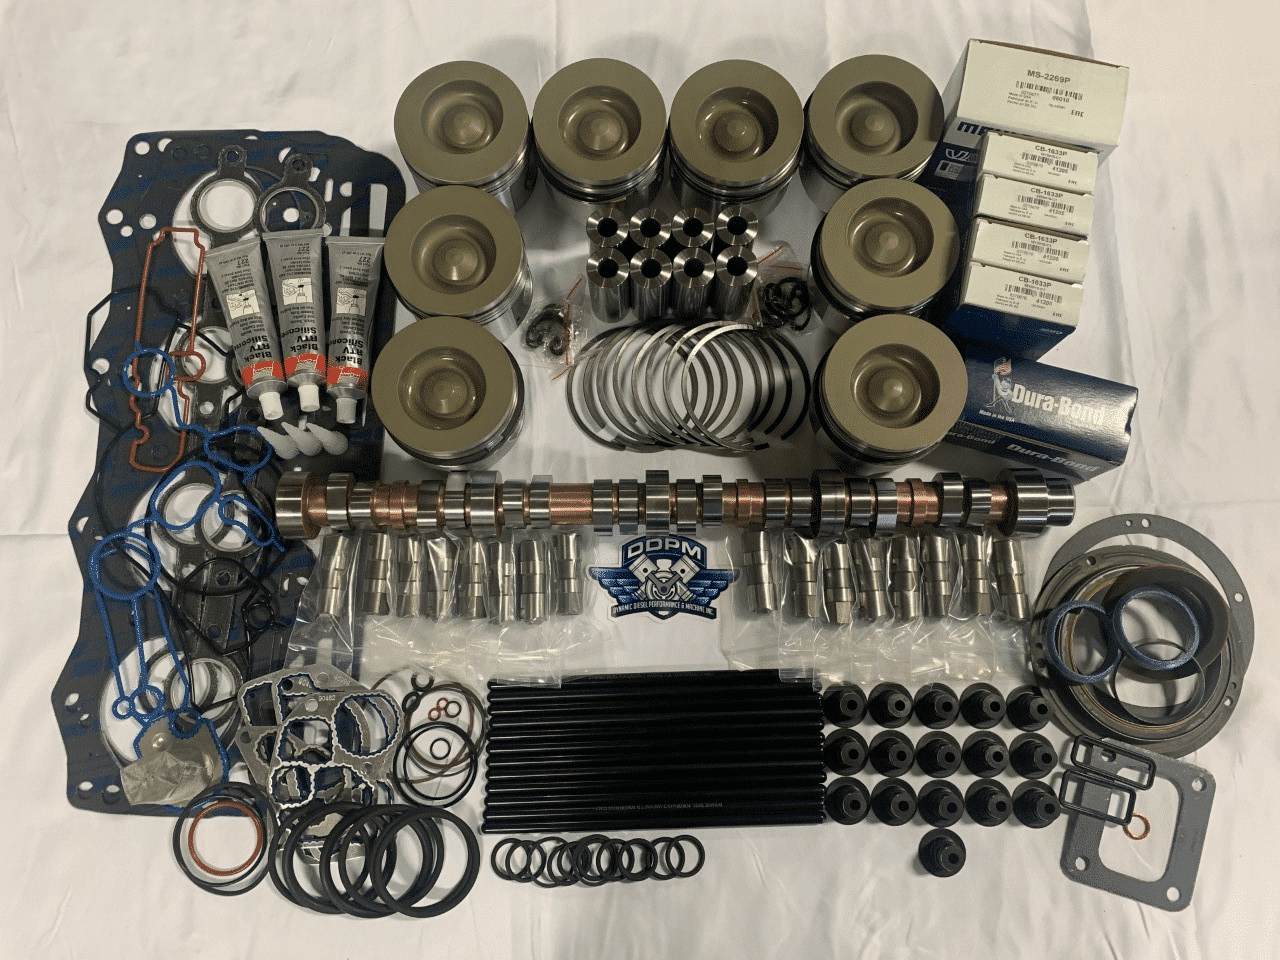 Engine Kit compatible with Ford Truck 7.3 Diesel Powerstroke 1994 95 96 .010 rods/.10 mains, std bore 